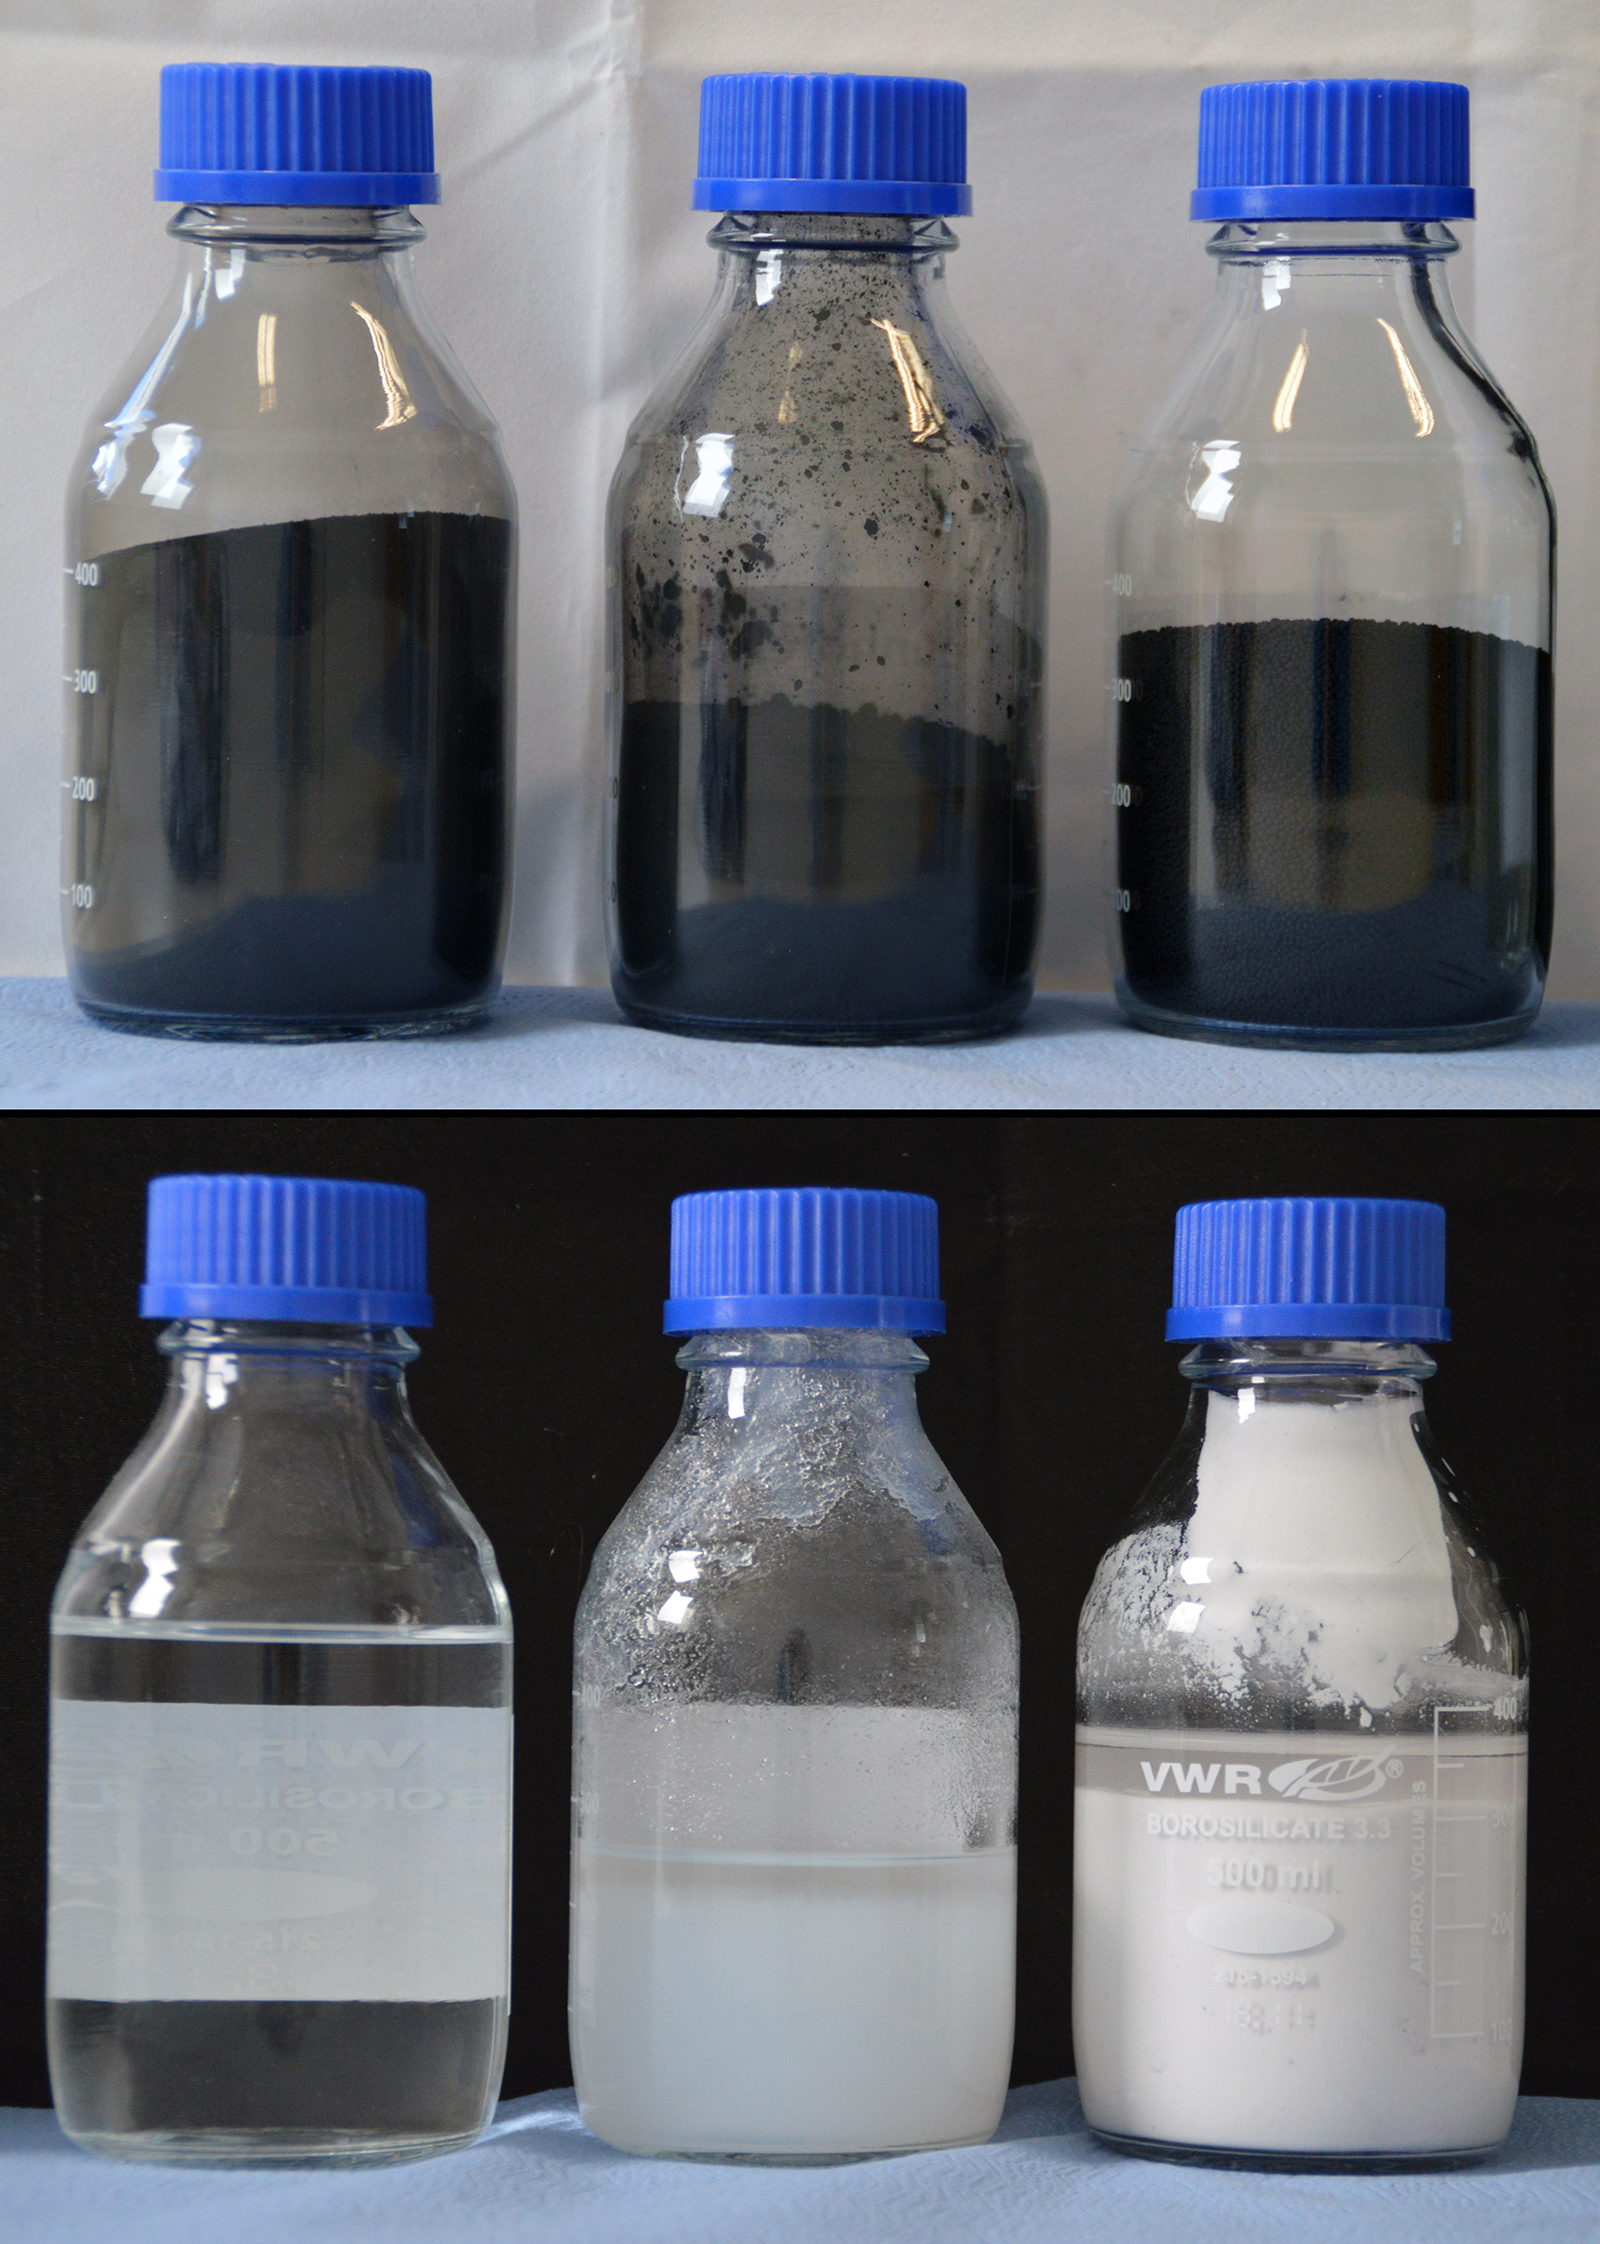 Top, primary product from left to right: raw rCB, clean rCB (96+), pearlized clean rCB (96+). Bottom, secondary products recovered from the ash, from left to right: liquid sodium silicate or "water glass", precipitated SiO2, precipitated ZnSO4.